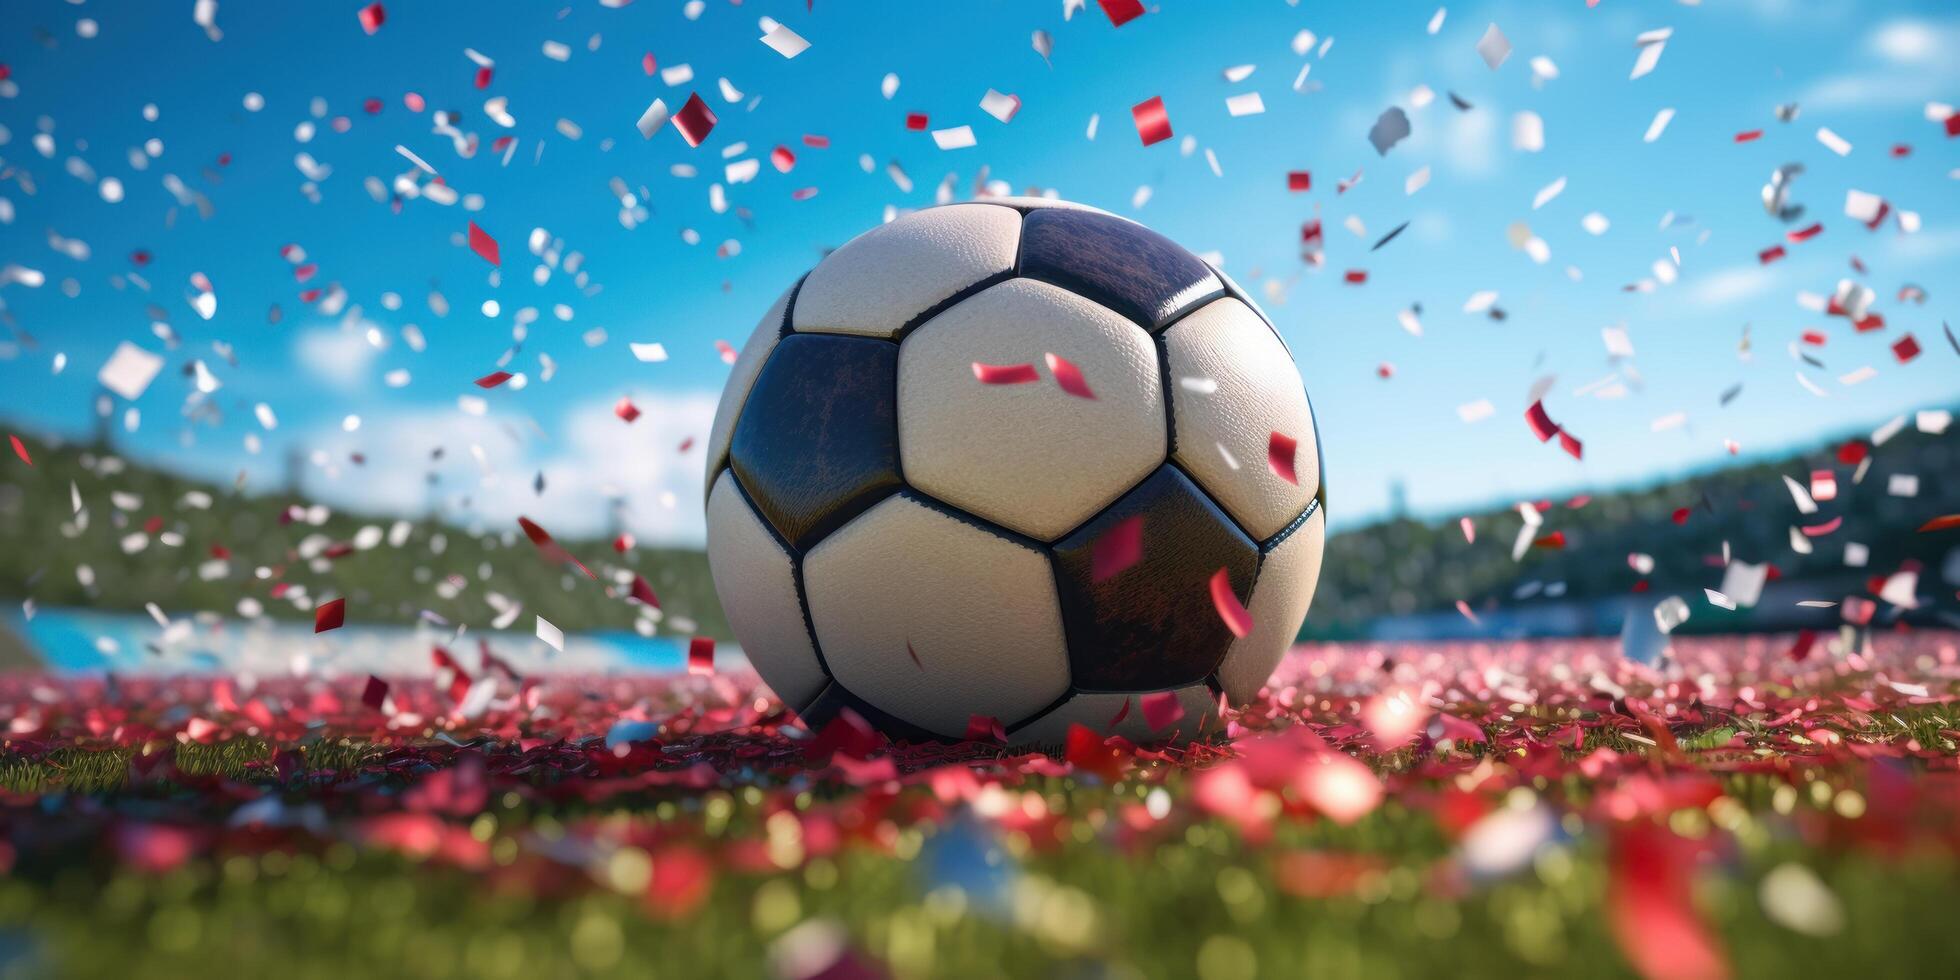 Ball soccer stadium on victory celebration time with confetti background. photo